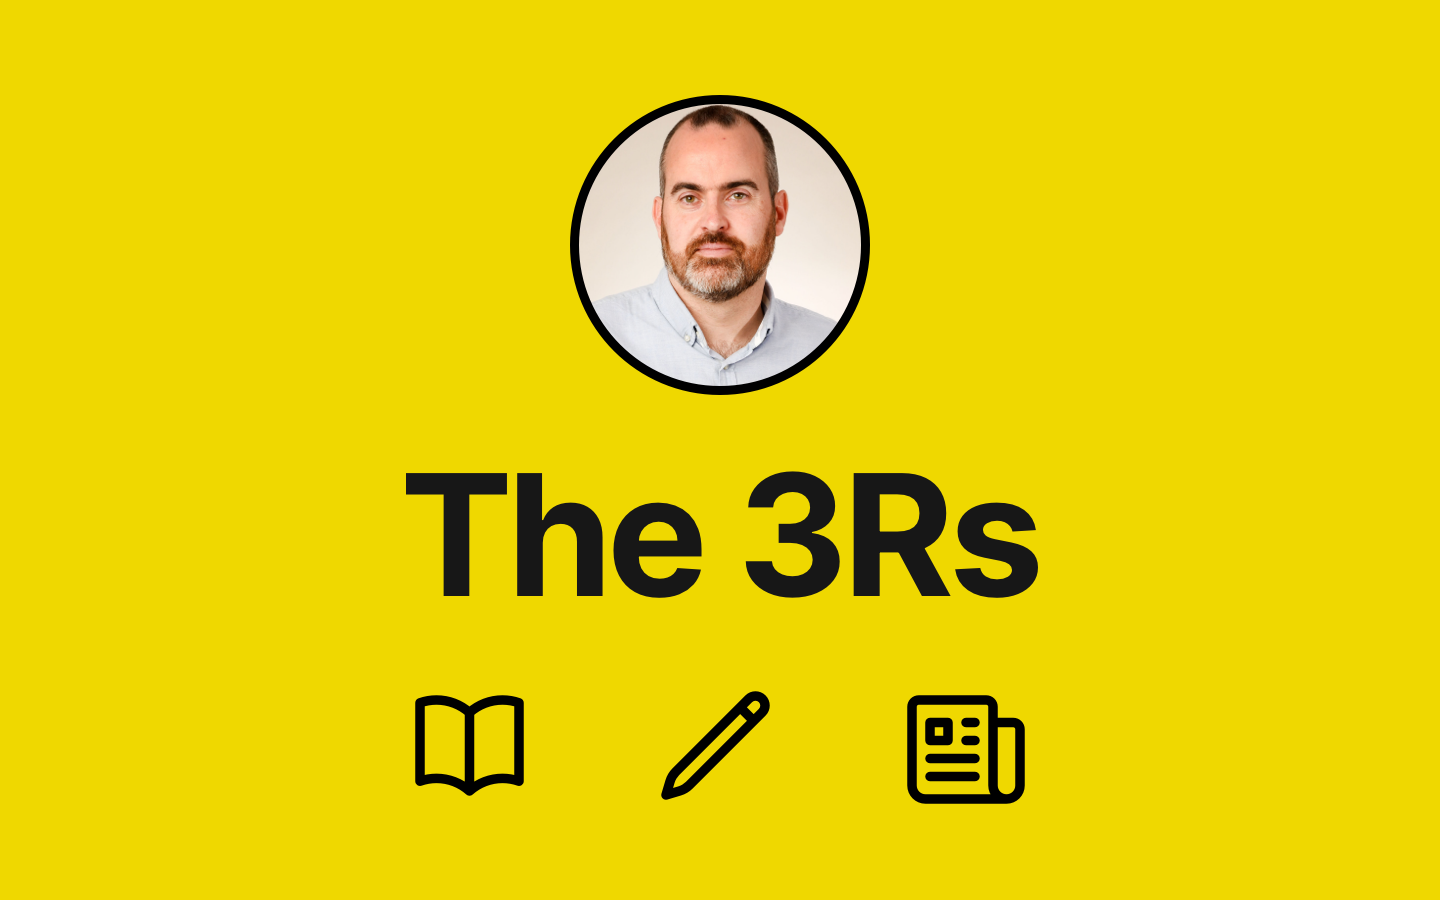 The 3Rs: What I'm reading, (w)riting, & the research I'm interested in - Issue #9 feature image